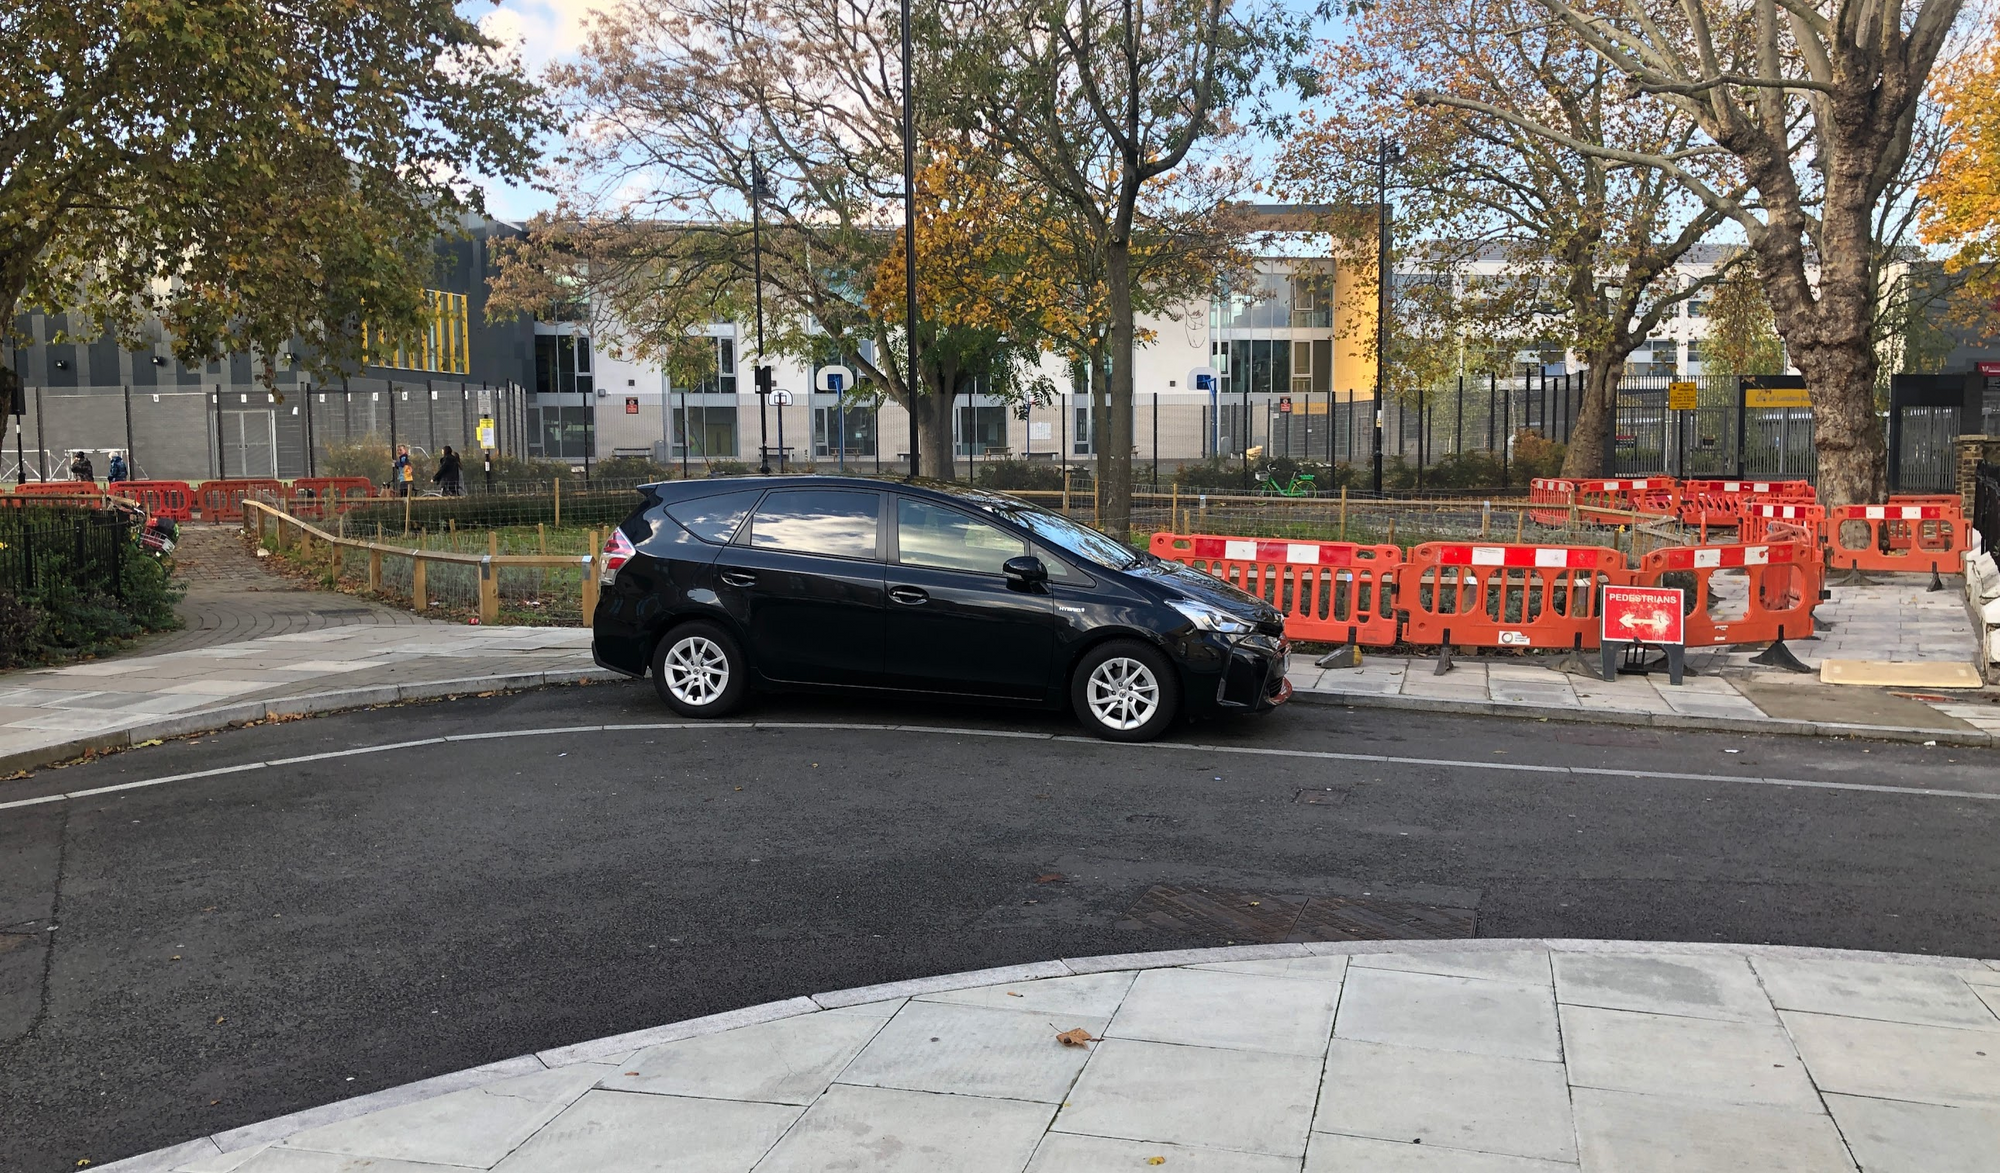 Accessibility issues in St Peter's